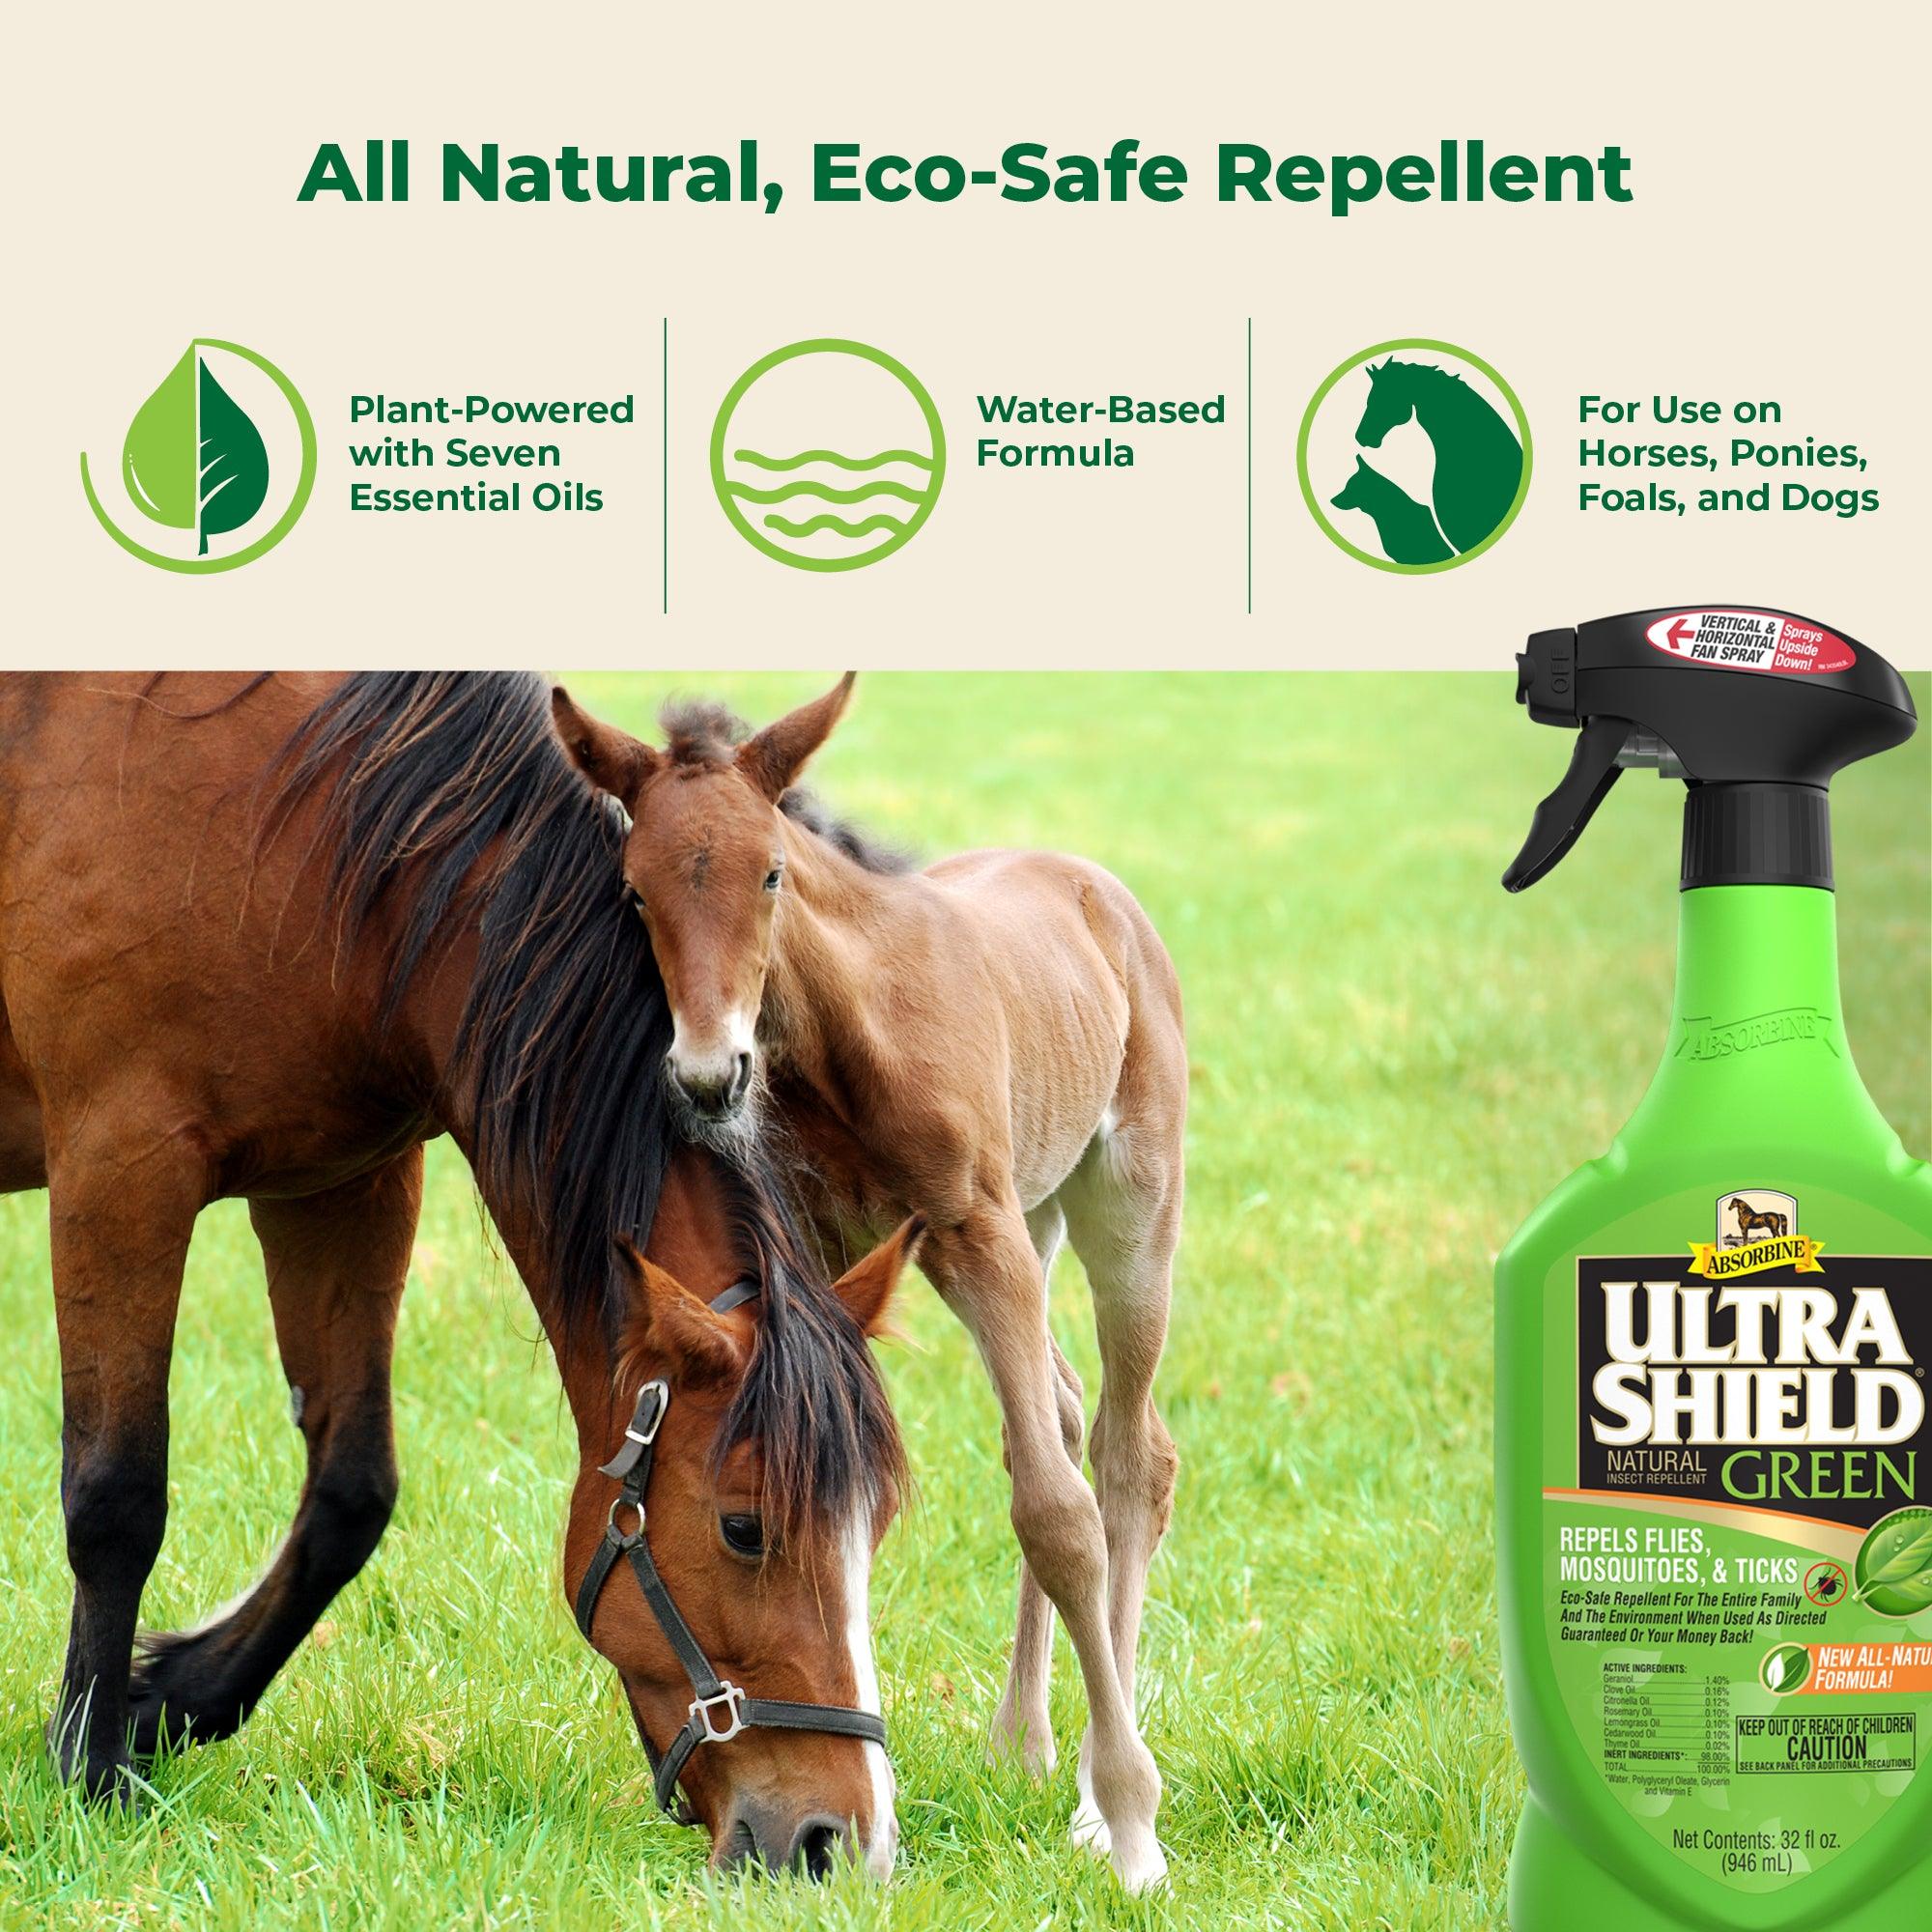 A foal snuggling the neck of his mother as she munches on some green grass.  UltraShield Green all natural, eco-safe replellent.  Plant-powered with seven essential oils, water based formula.  For use on horses, ponies, foals and dogs.